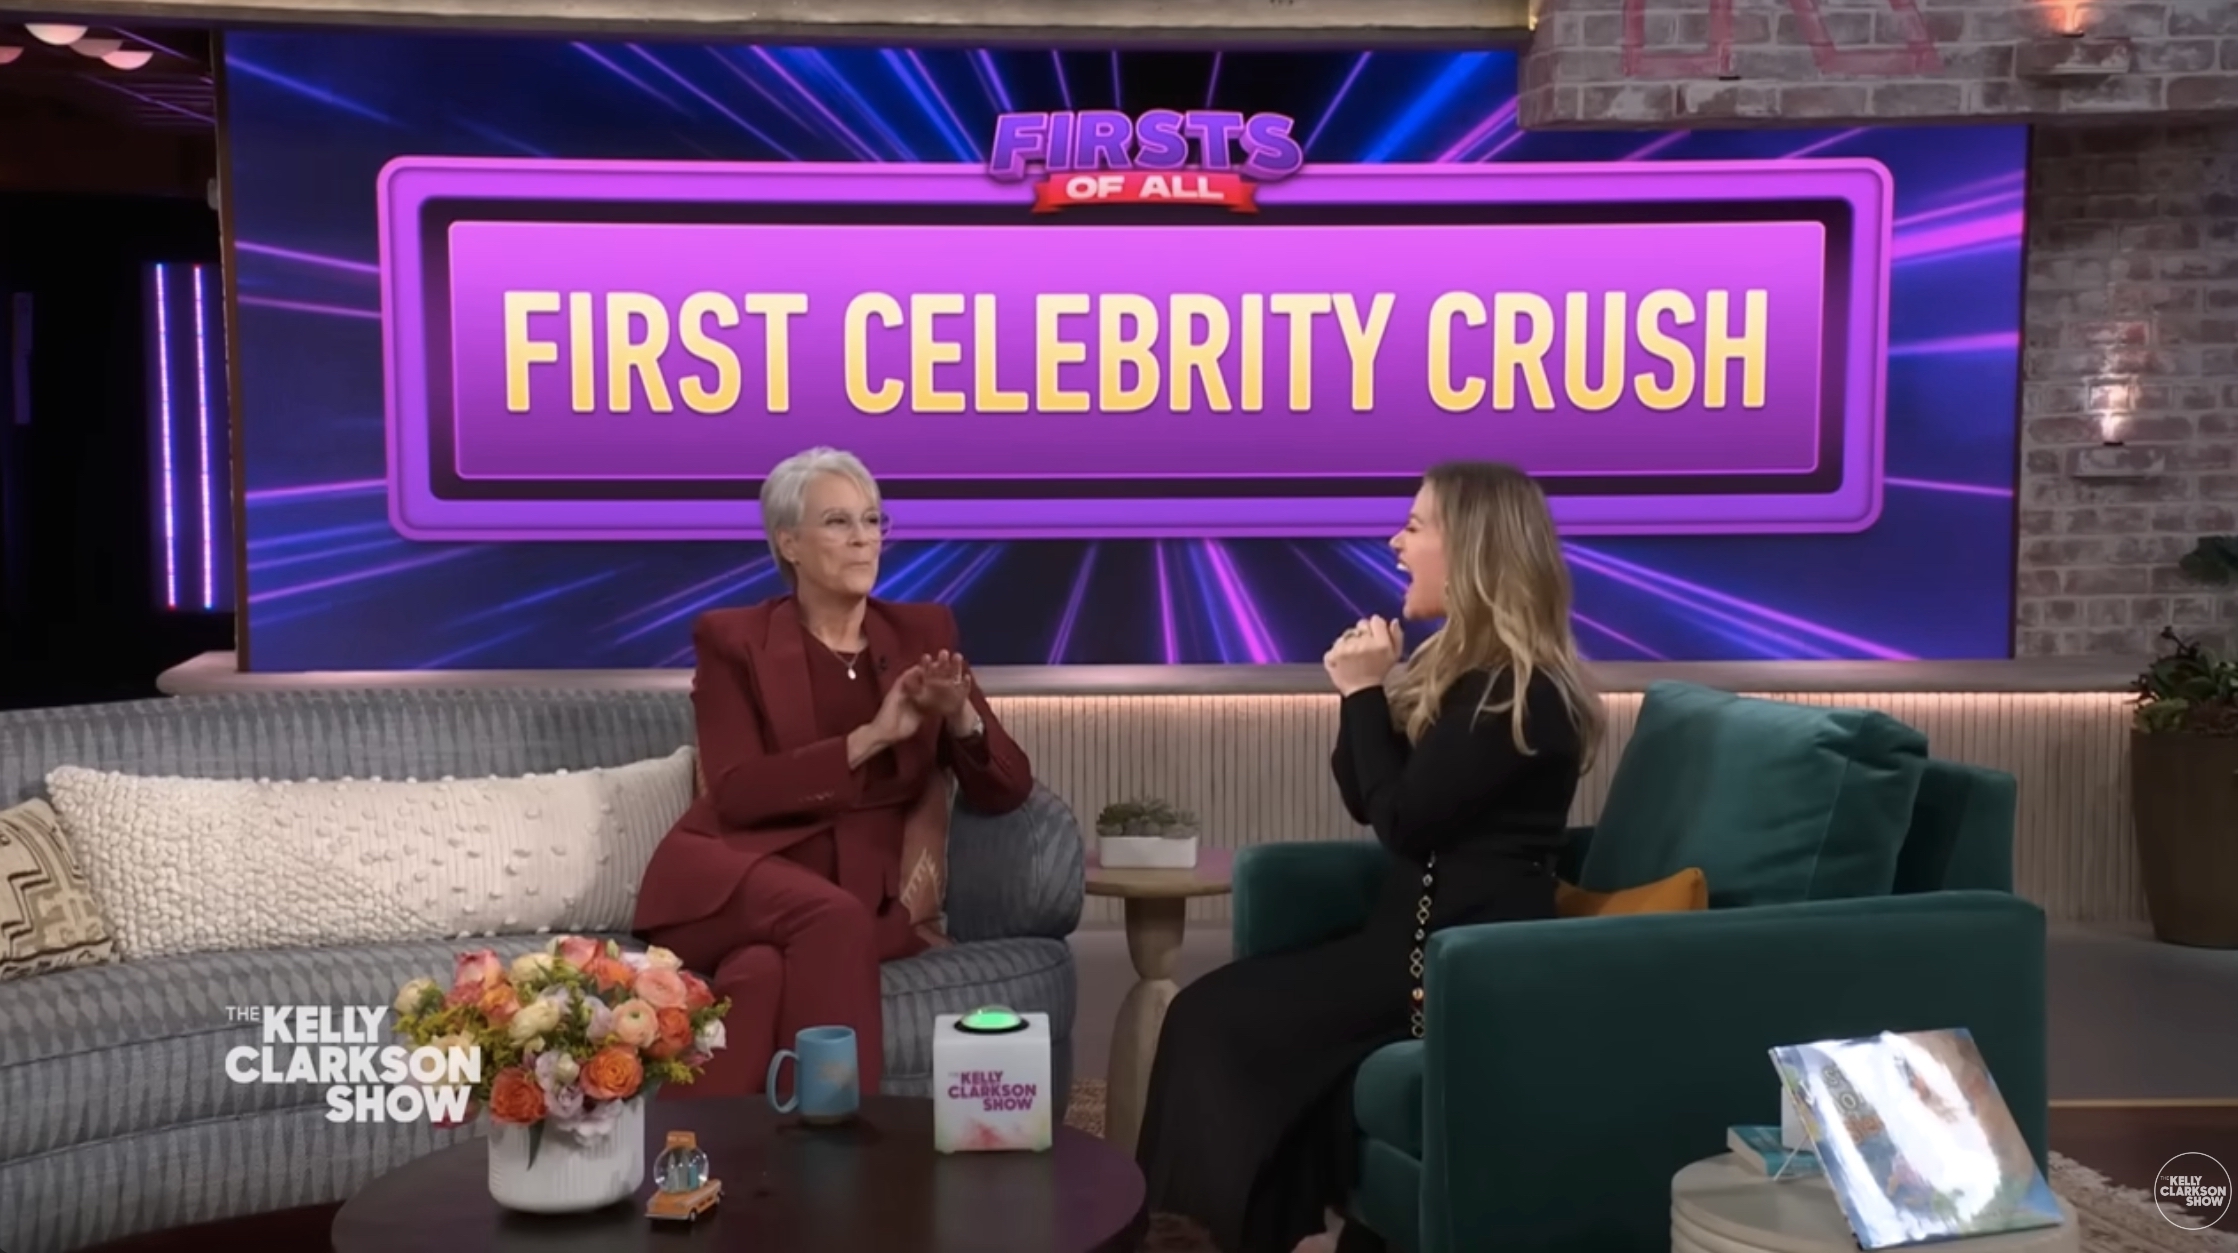 Kelly revealed to Jamie Lee Curtis that her first celebrity crush was Steven Tyler